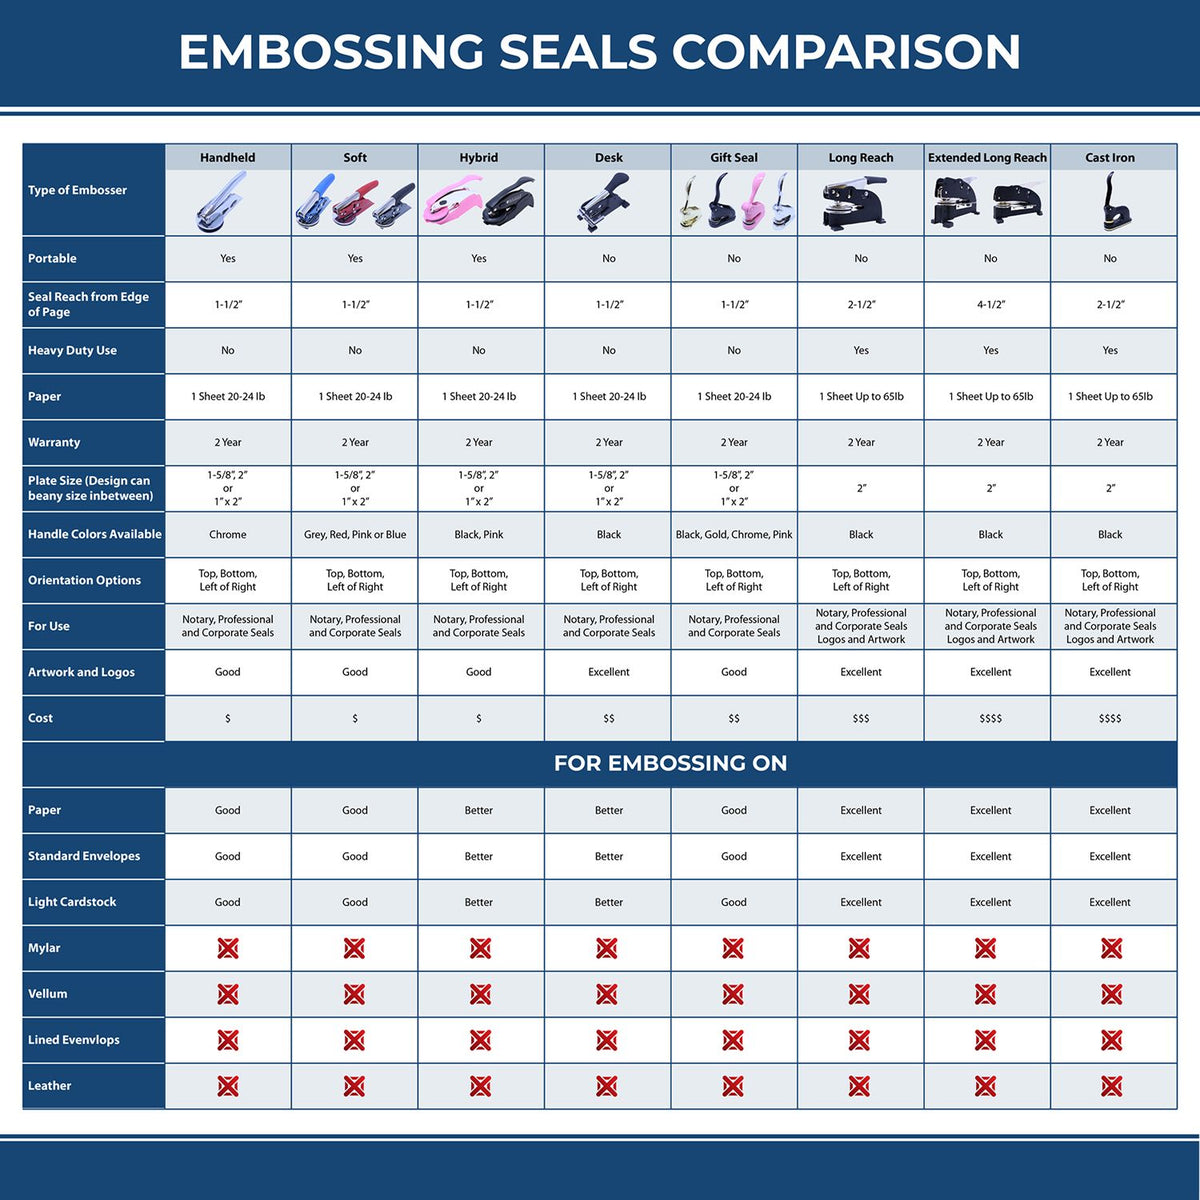 A comparison chart for the different types of mount models available for the Hybrid Nevada Architect Seal